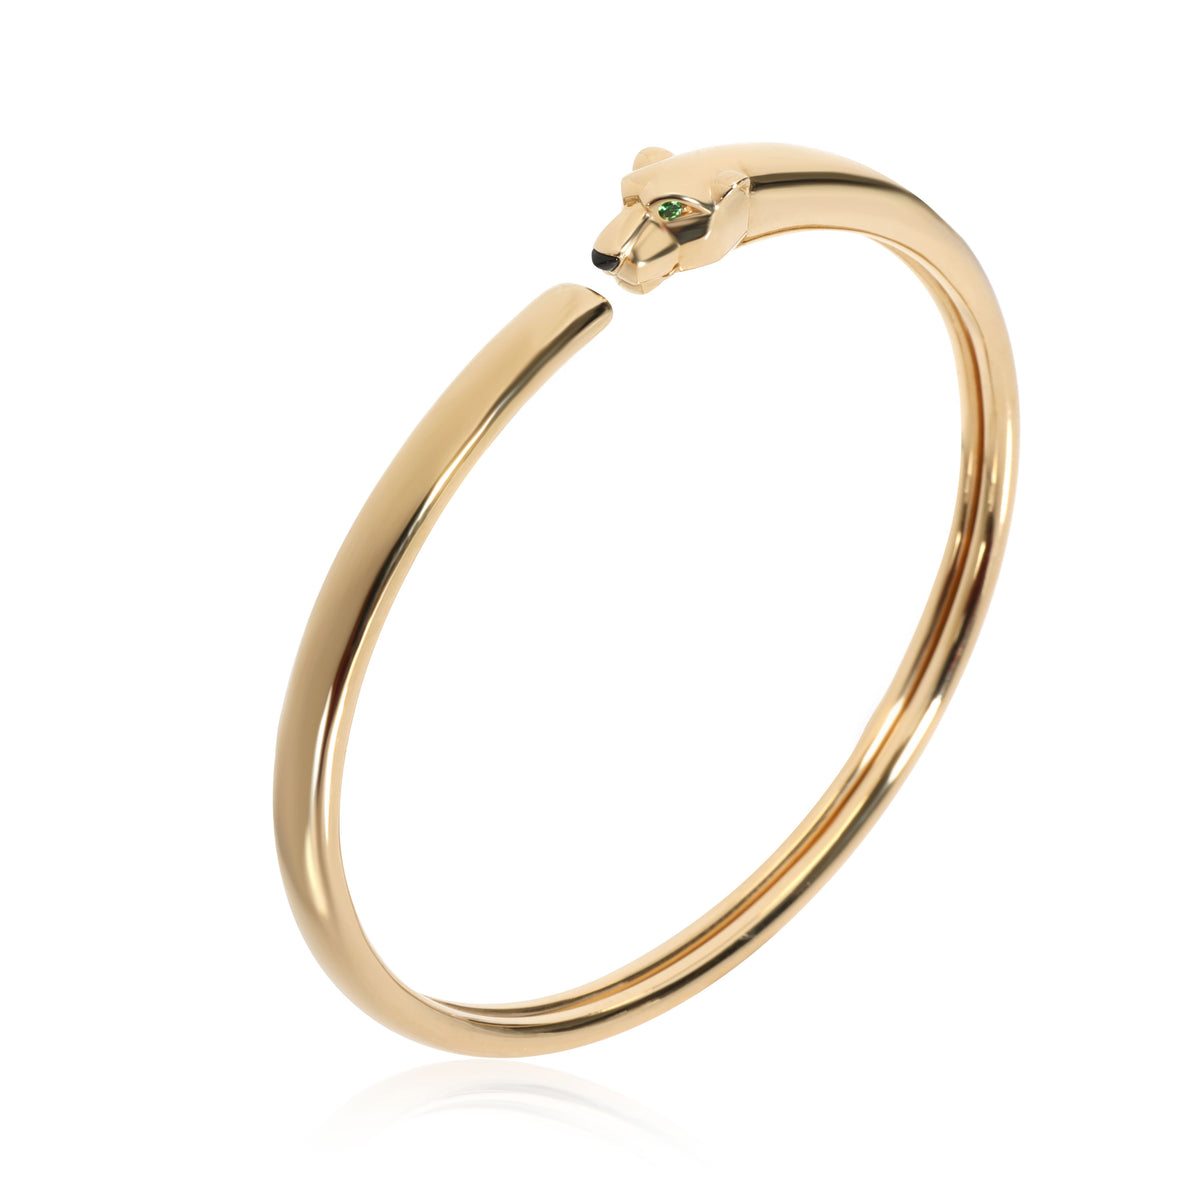 Cartier Panthere Bangle in 18K Yellow Gold